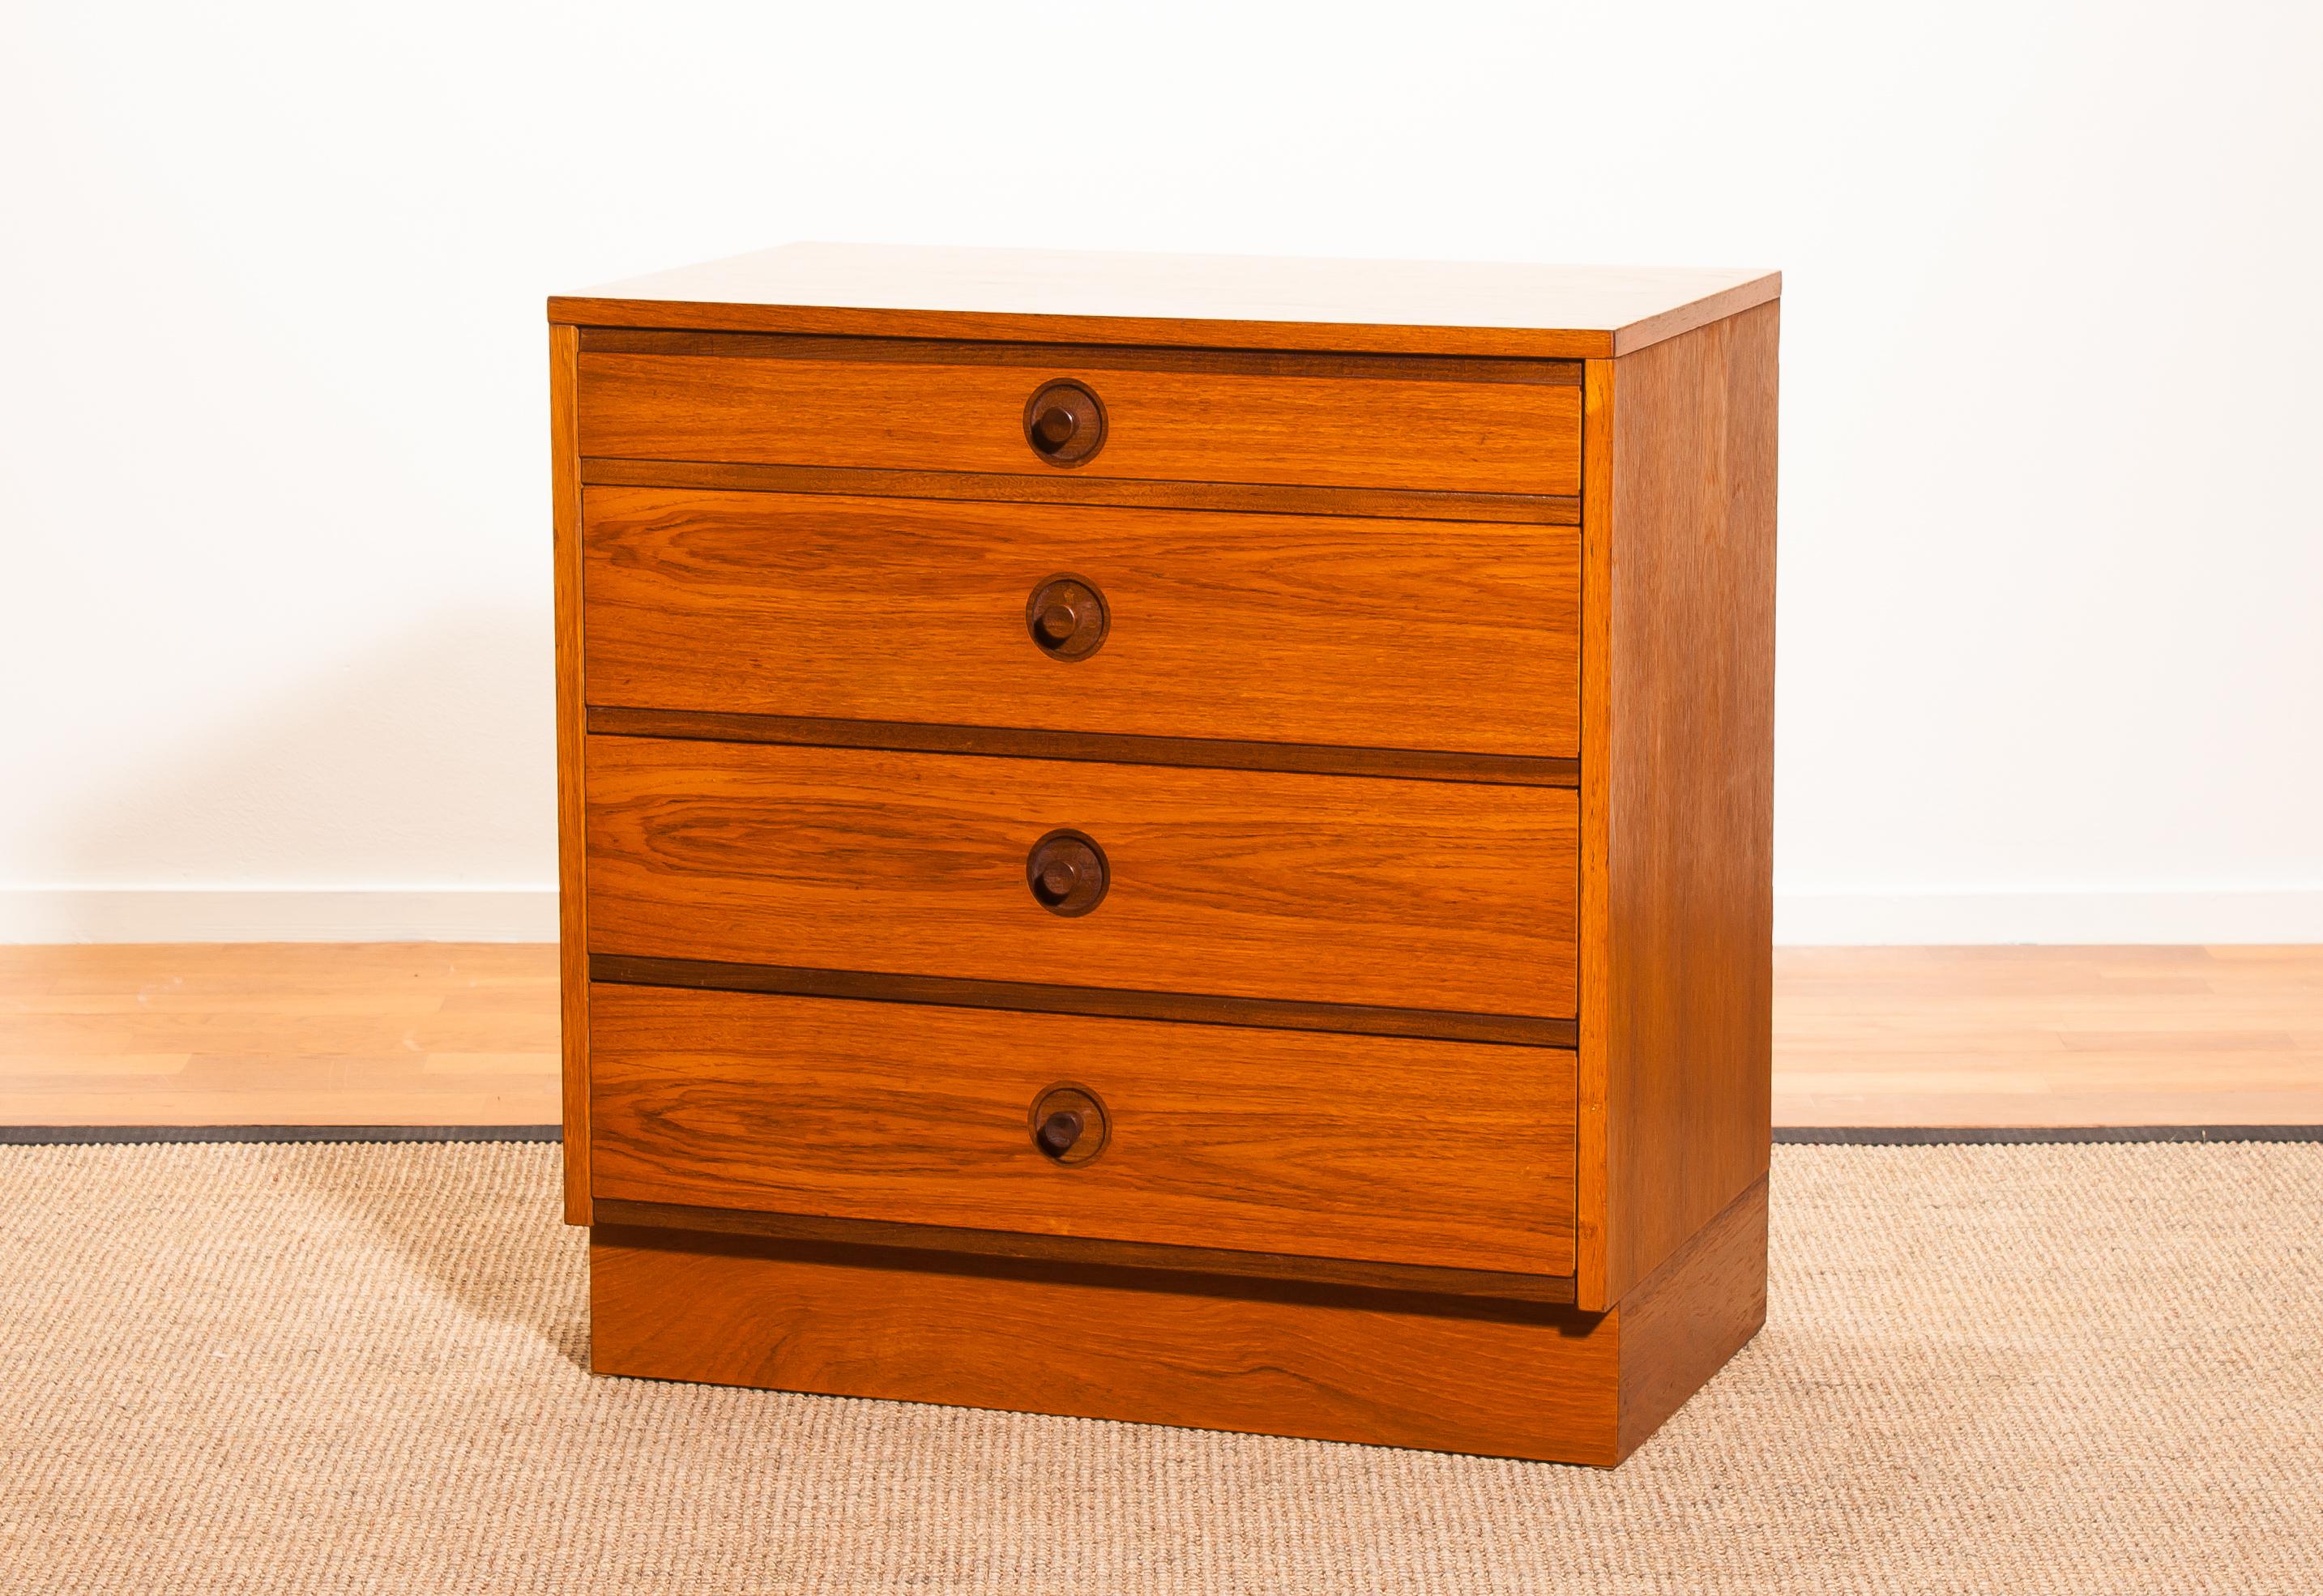 Very nice chest of drawers by Børge Mogensen for Karl Andersson & Söner Denmark.
This cabinet is made of teak and has four drawers.
It is in a beautiful condition.
Period 1950s.
Dimensions: H 68 cm, W 66 cm, D 40 cm.